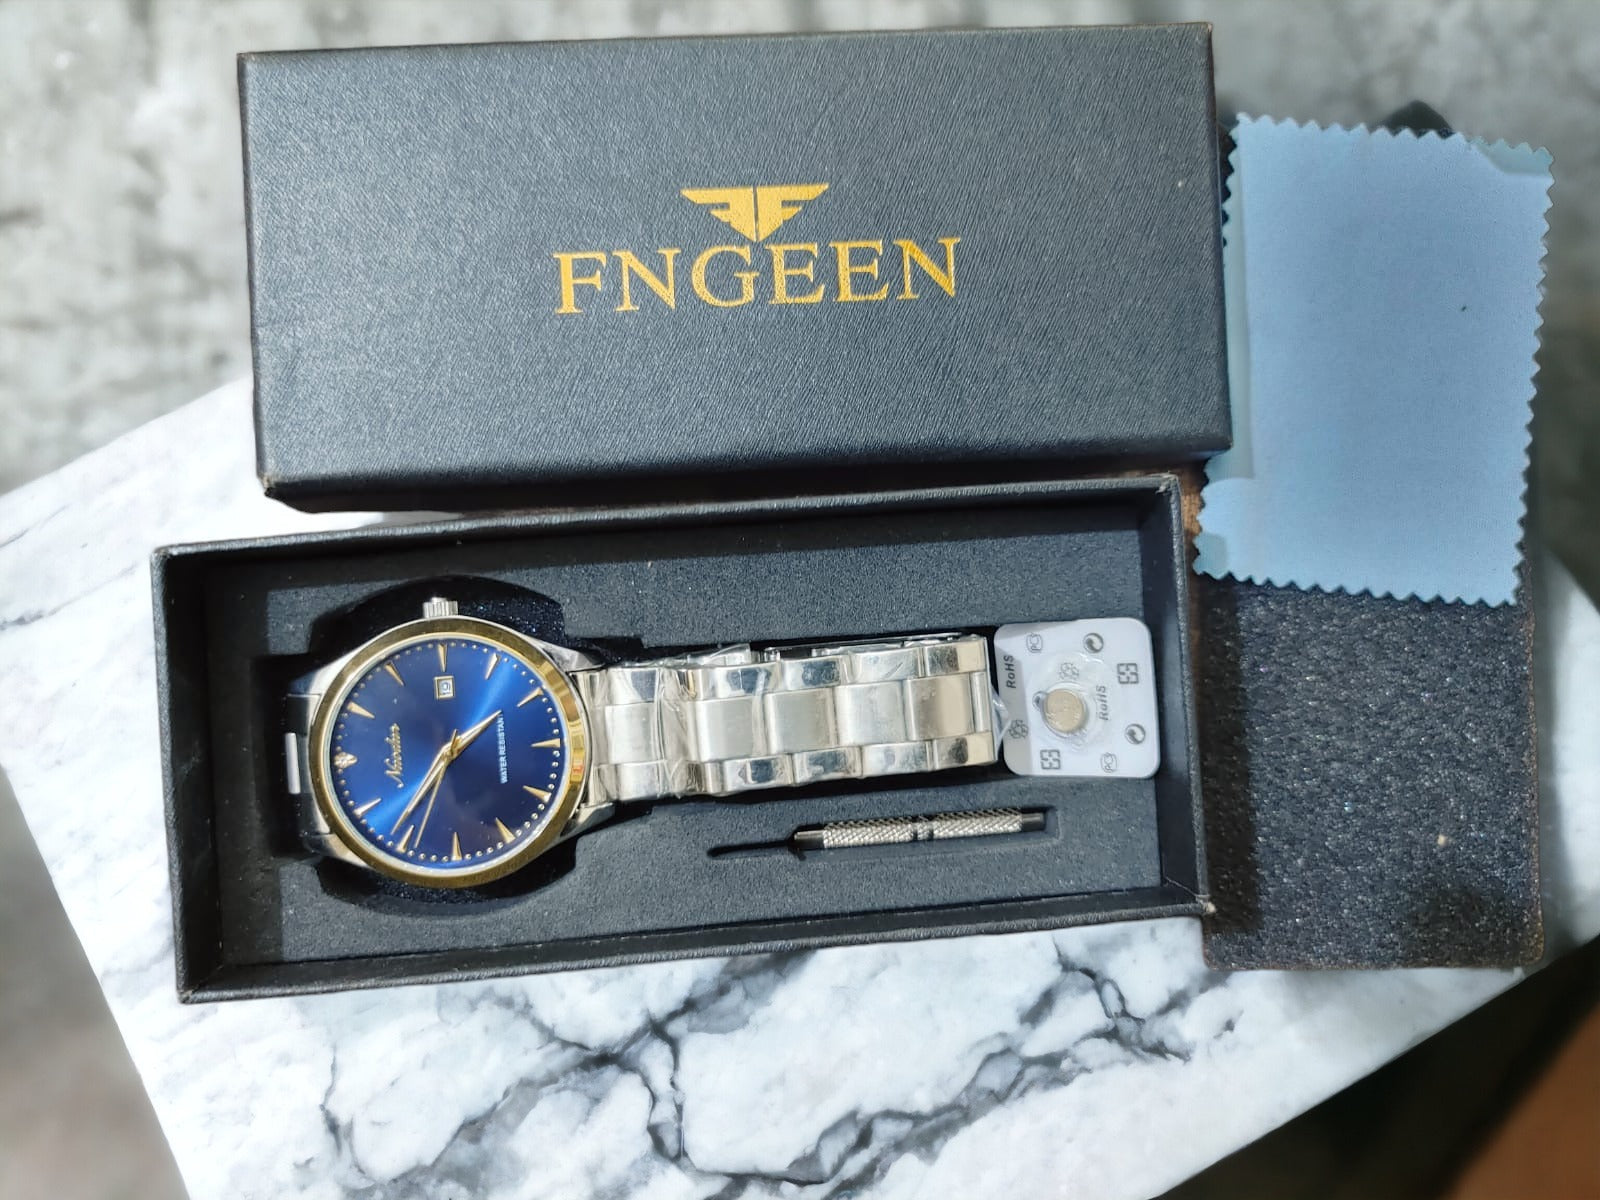 Imported Silver Watch with Date Display and Striking Blue Screen - Fashion Trident